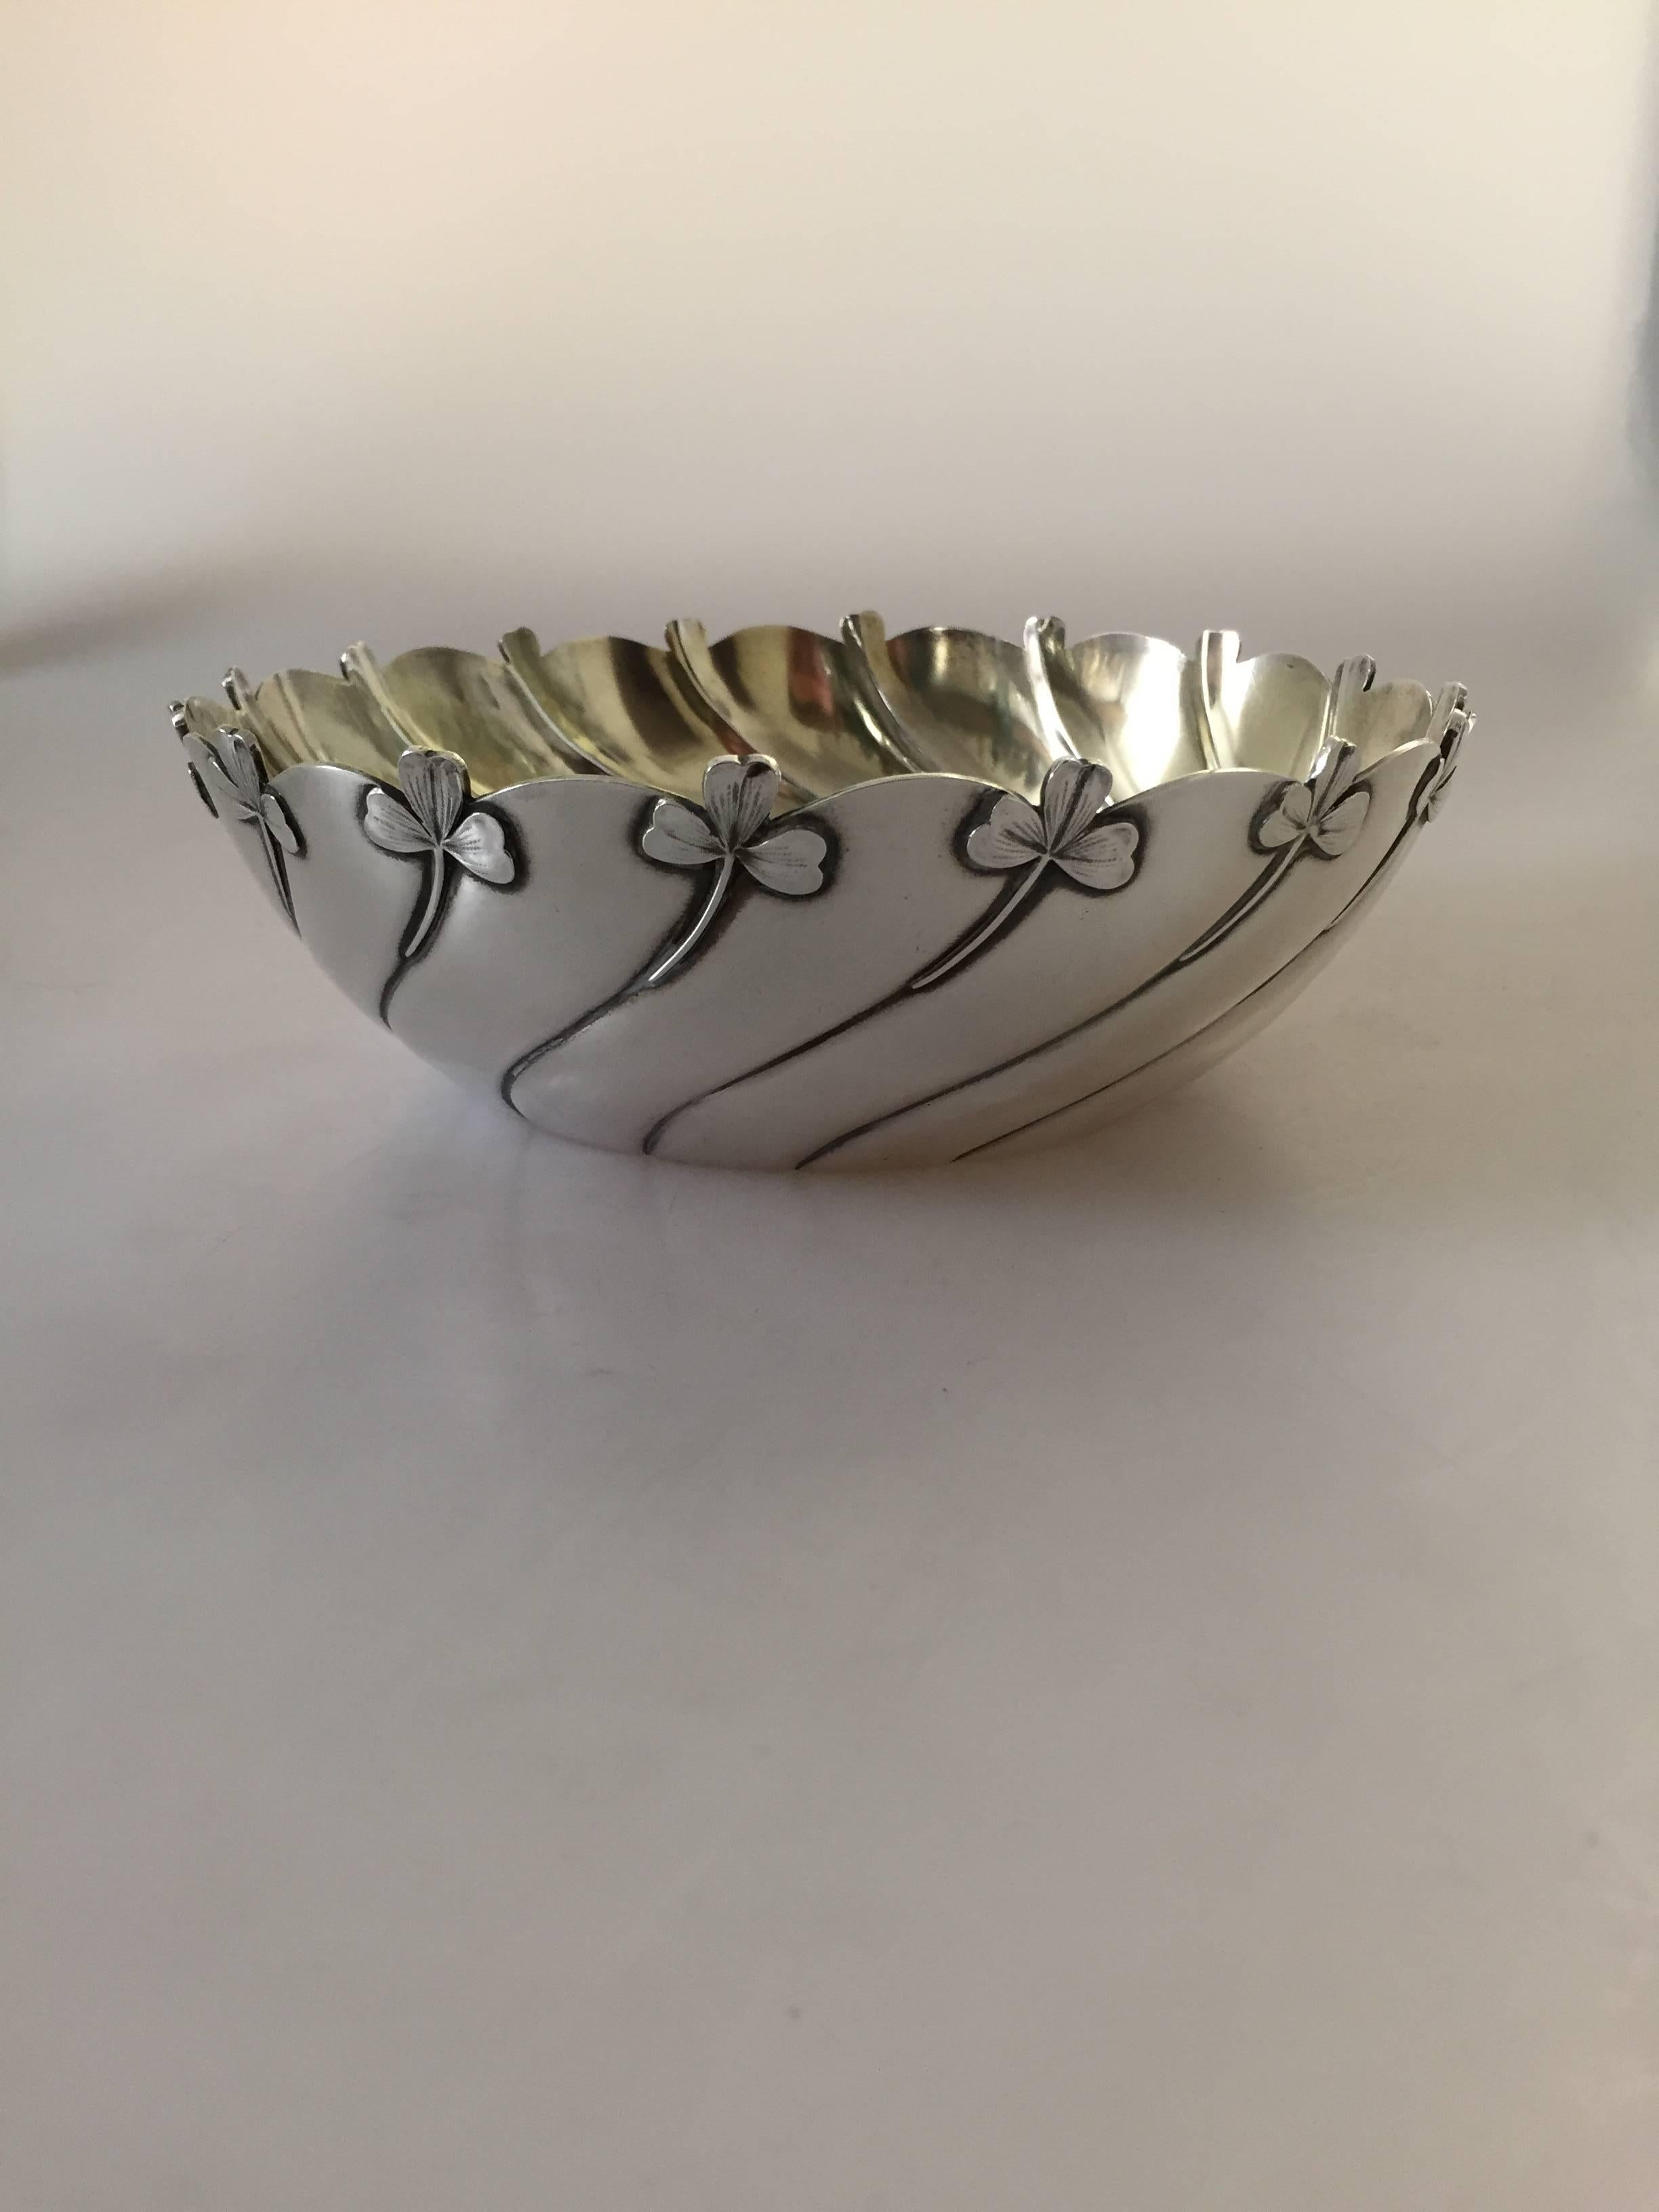 Anton Michelsen sterling silver Art Nouveau decorative bowl from 1902, Denmark. Gilded on the inside. Is in good condition.

Measures: 21.5 cm x 7 cm and is in good condition.